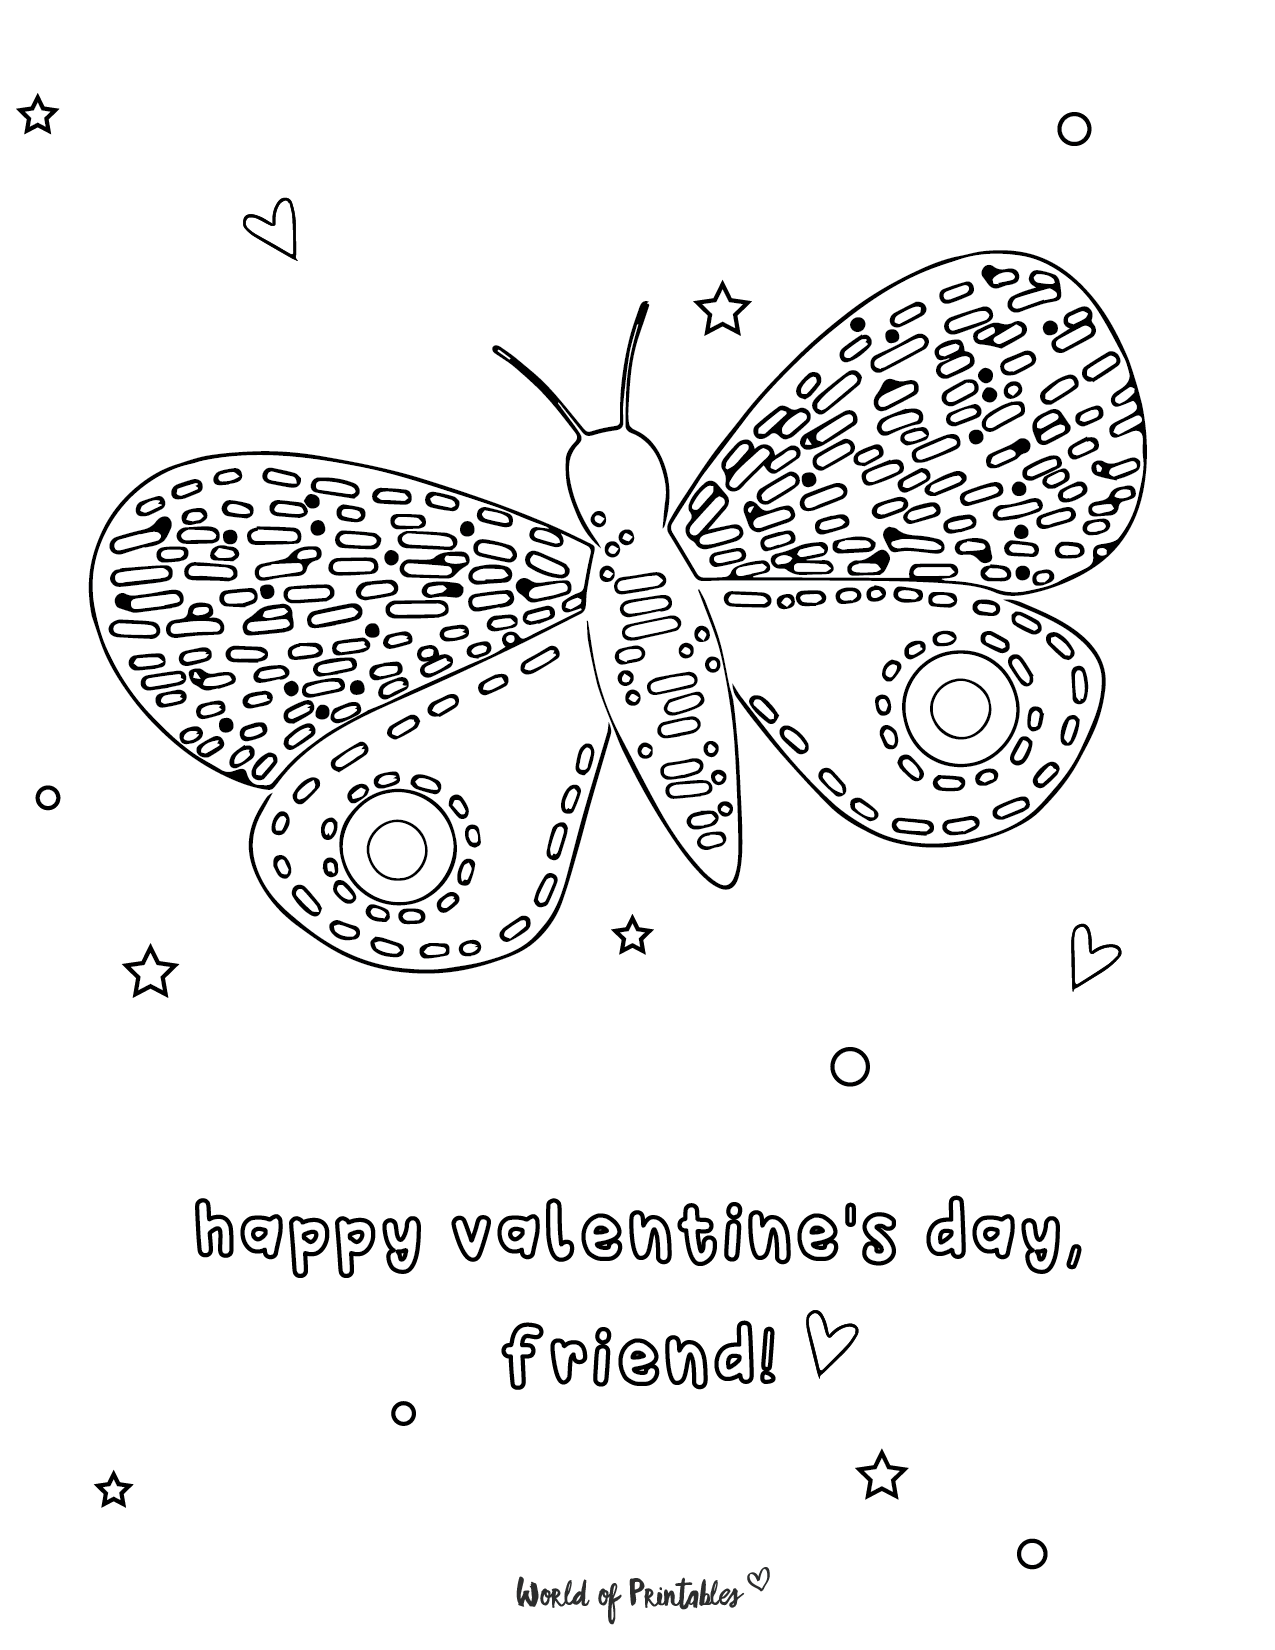 Valentines Day Coloring Pages   20 Free Printables To Color ...